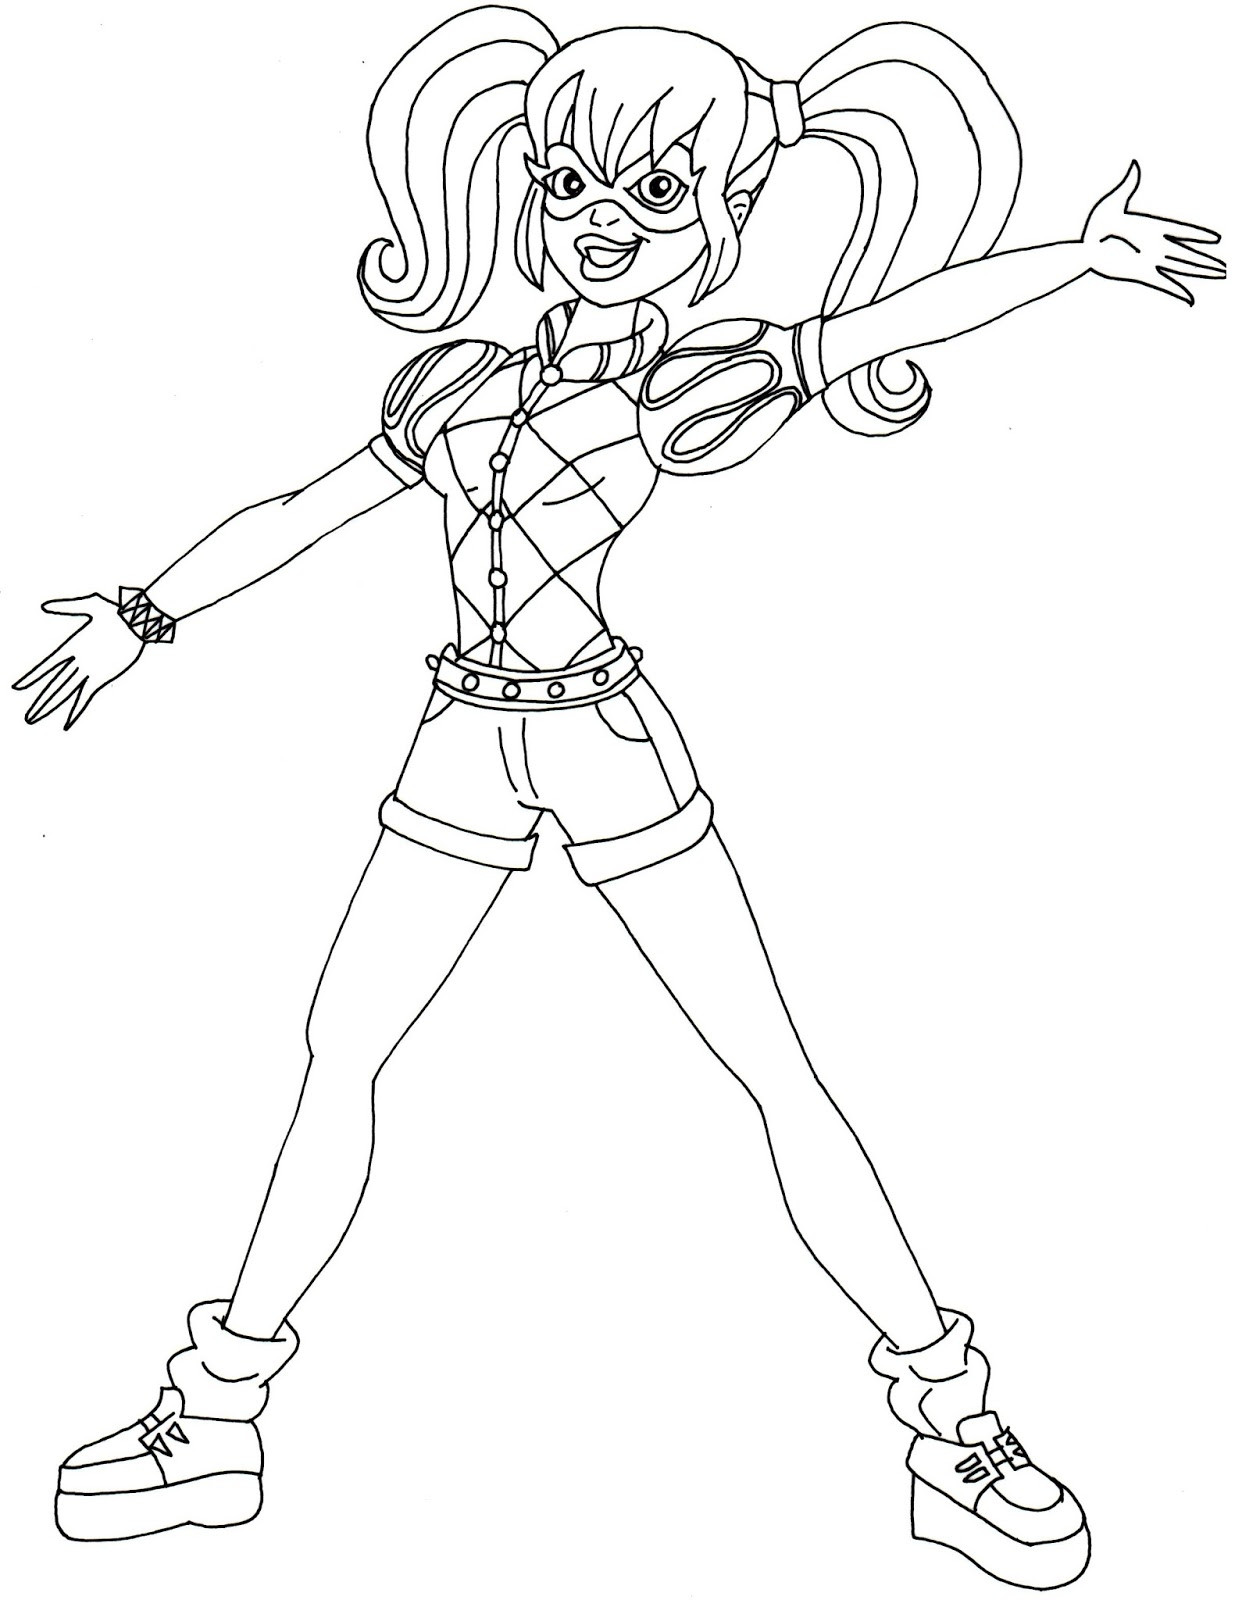 Harley Quinn Coloring Pages For Kids
 Harley Quinn Coloring Pages Best Coloring Pages For Kids